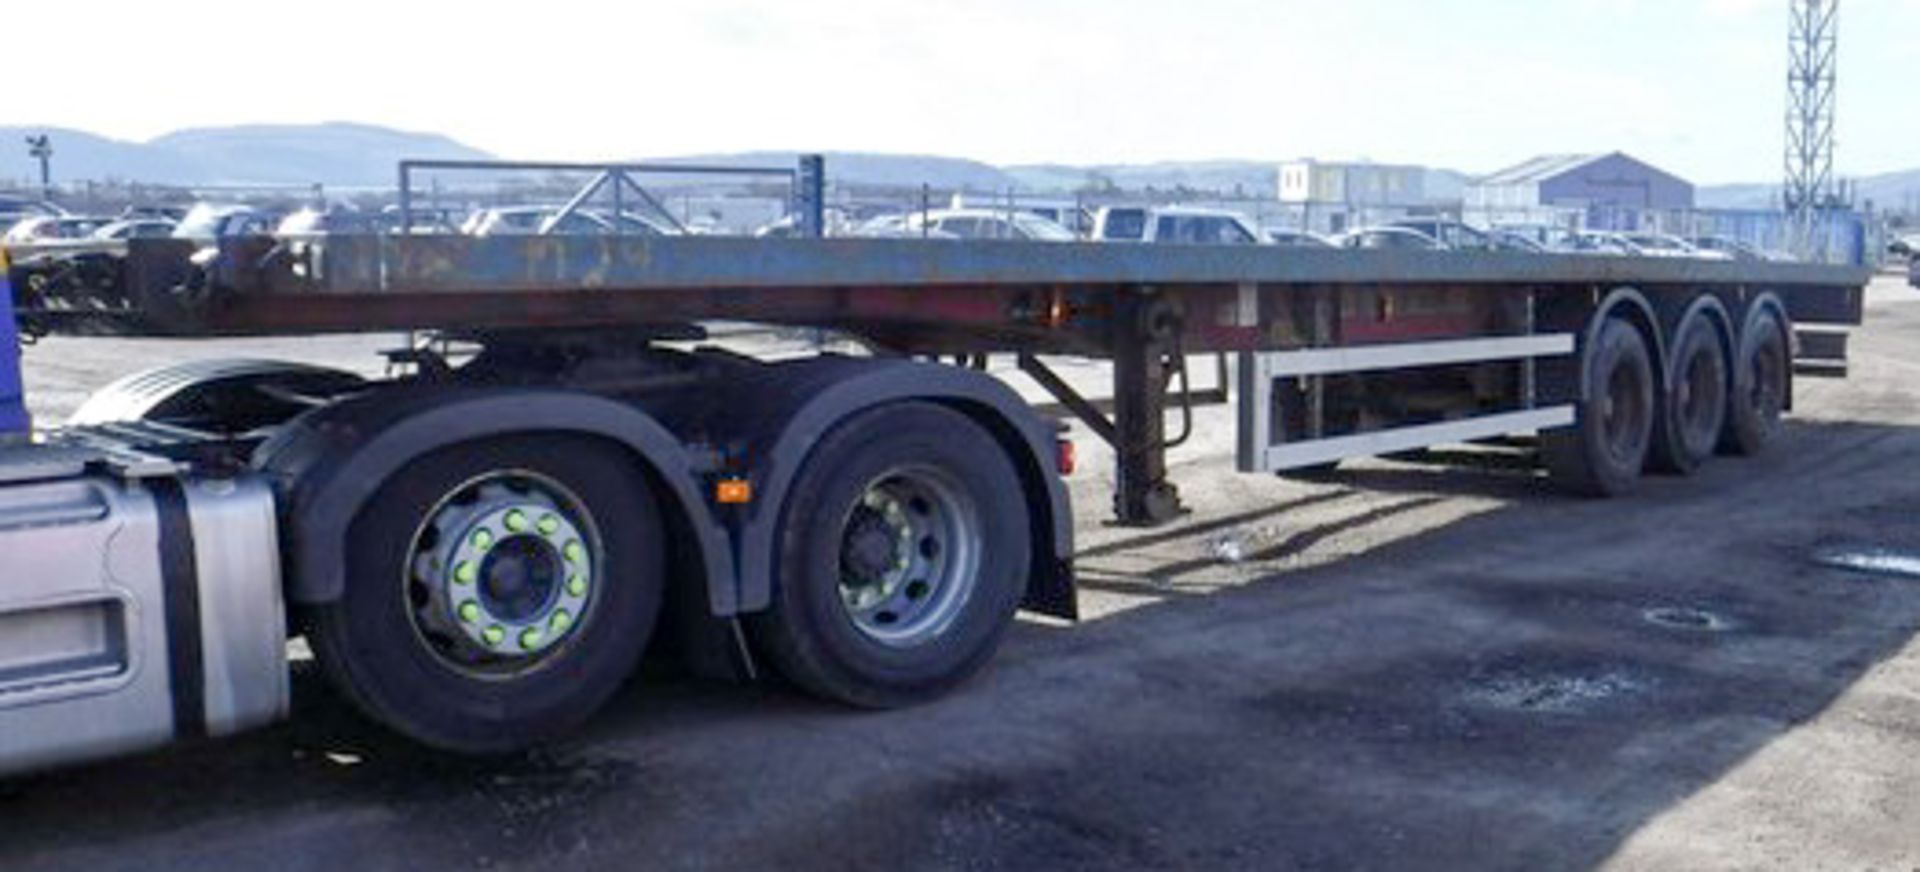 2004 MONTRACON FLATBED, REG C160047, ID 22187, 3 AXLES, MOT UNTIL NOVEMBER 2018 NO DOC IN OFFICE